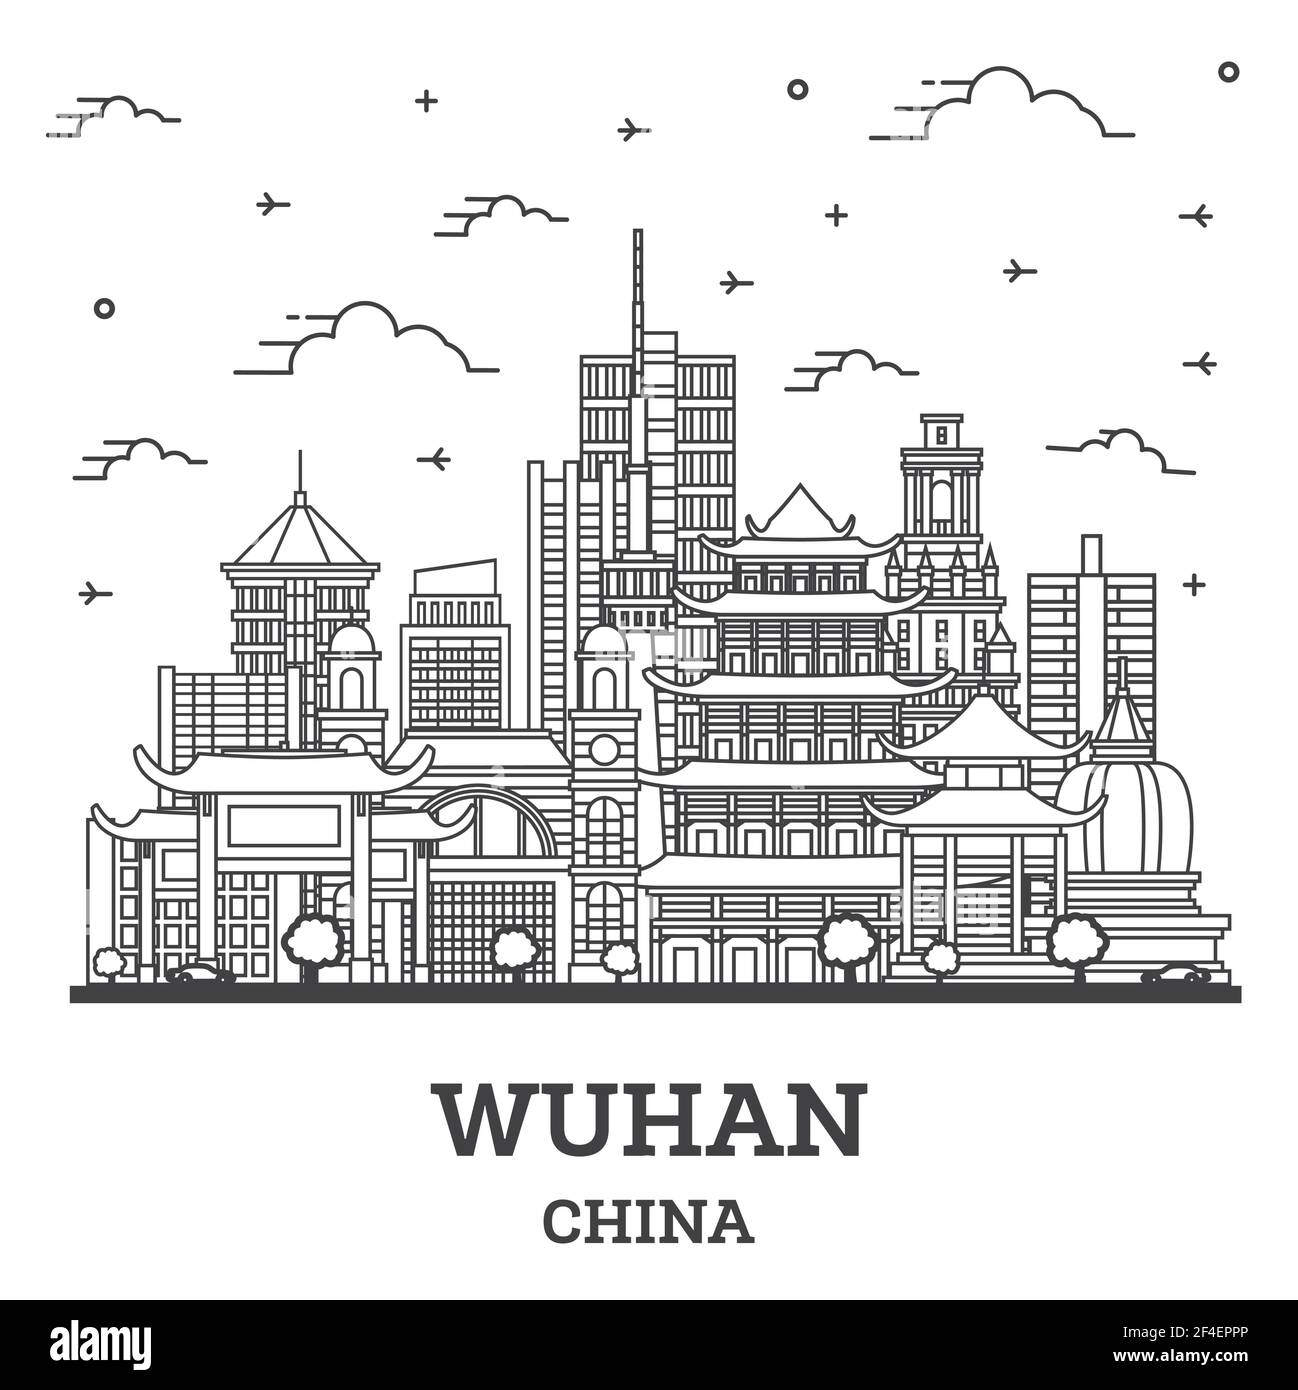 Outline Wuhan China City Skyline with Modern Buildings Isolated on White. Vector Illustration. Wuhan Cityscape with Landmarks. Stock Vector